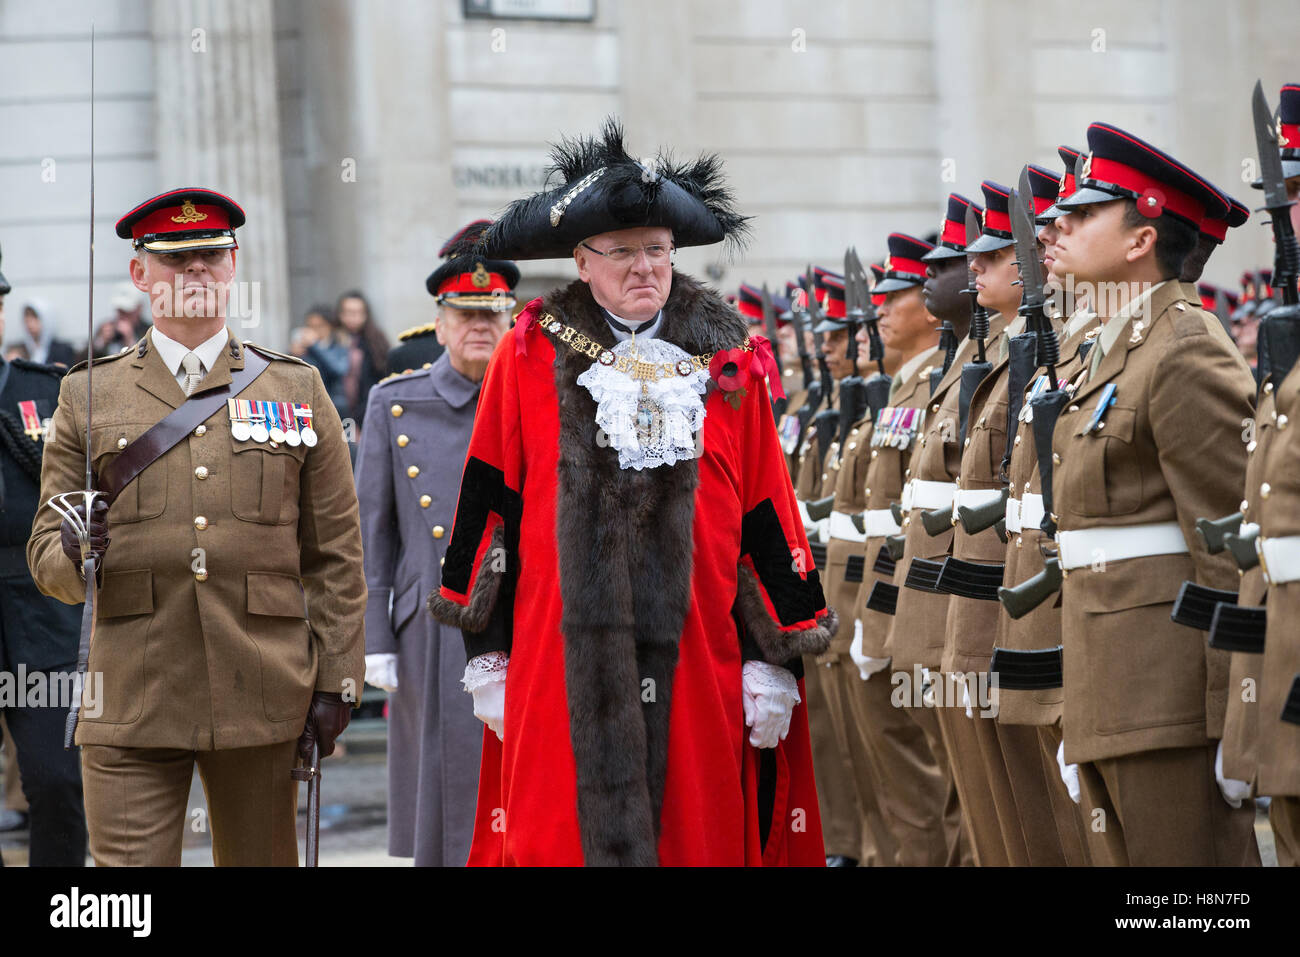 Lord Mayor,Dr Andrew Parmley inspects the guard of honour during the Lord Mayor's show outside the Mansion House. Stock Photo